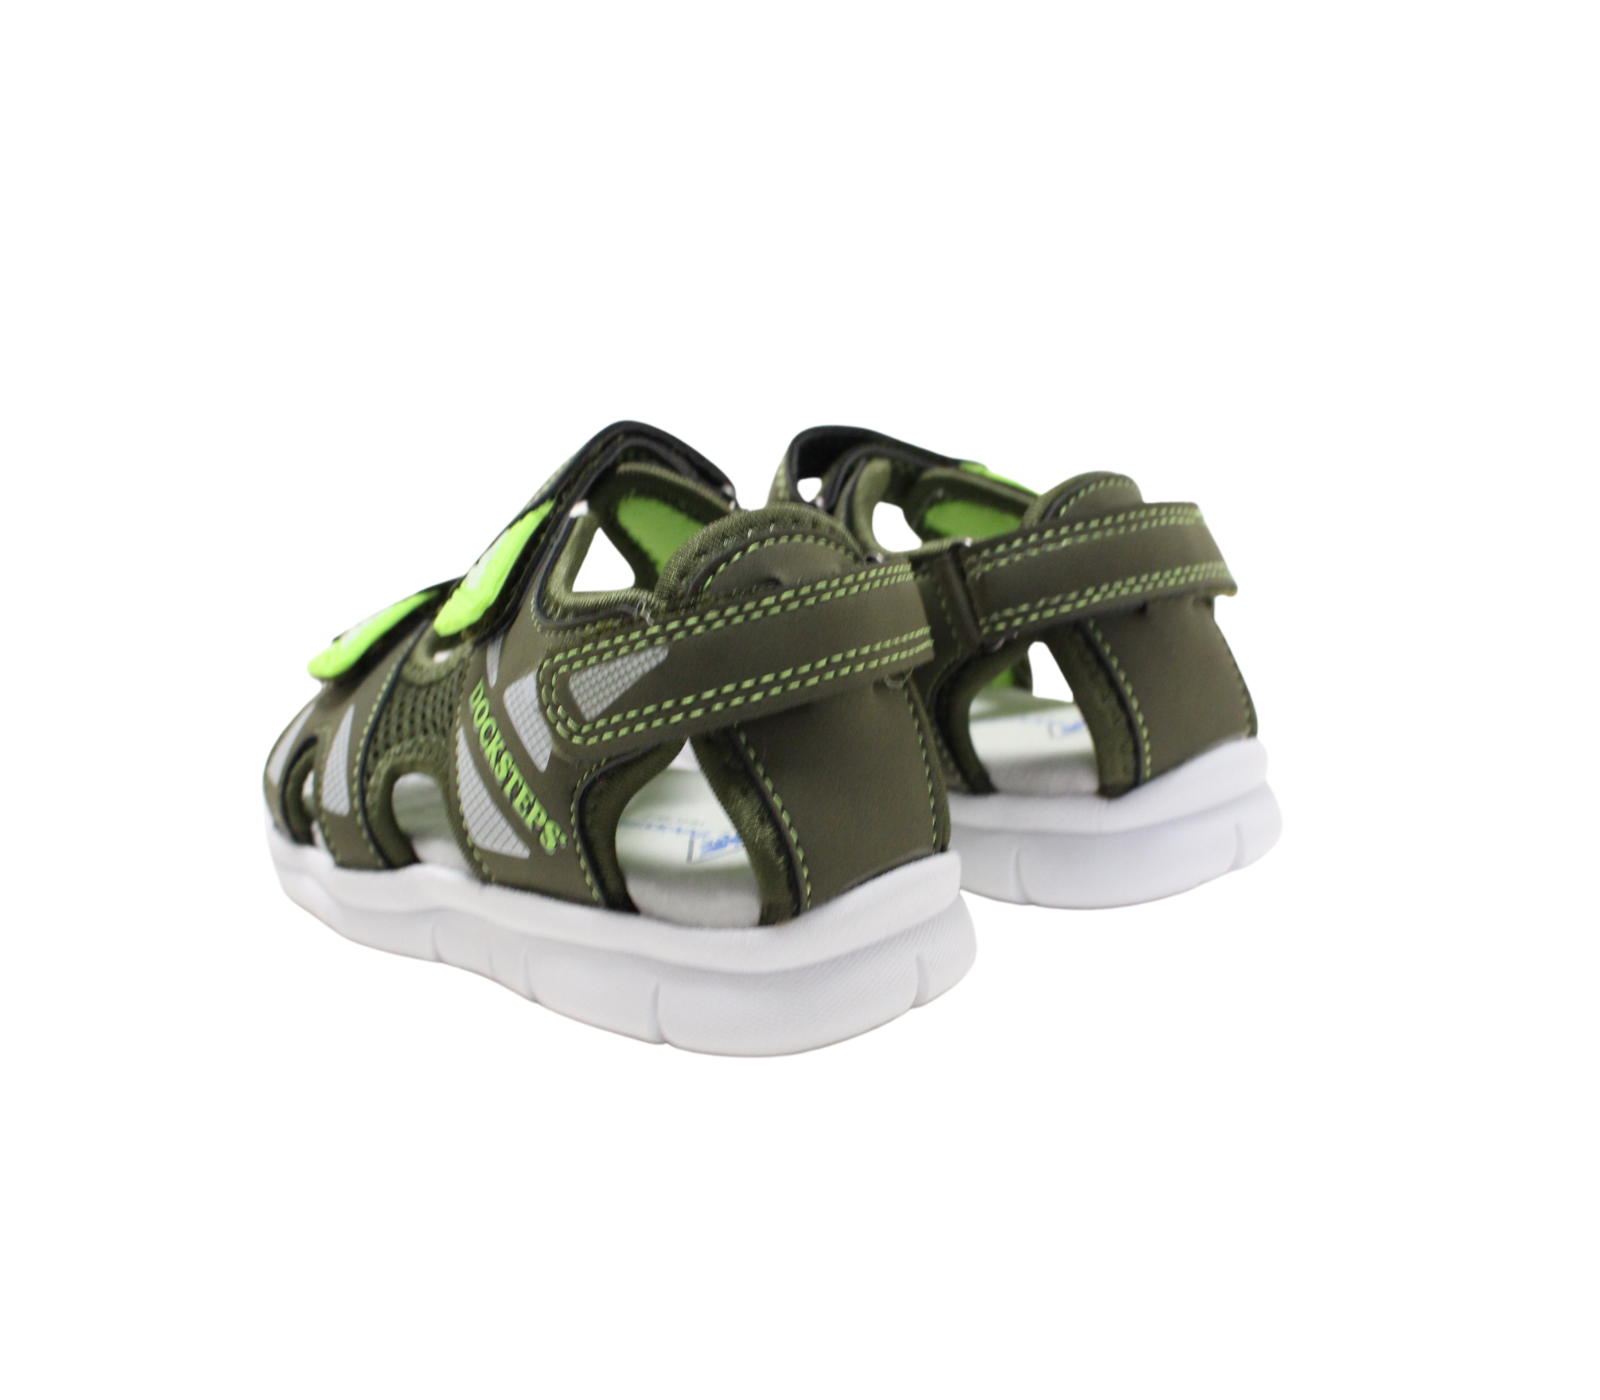 Child's Sandals in Military Green Leatherette and Padded Fabric